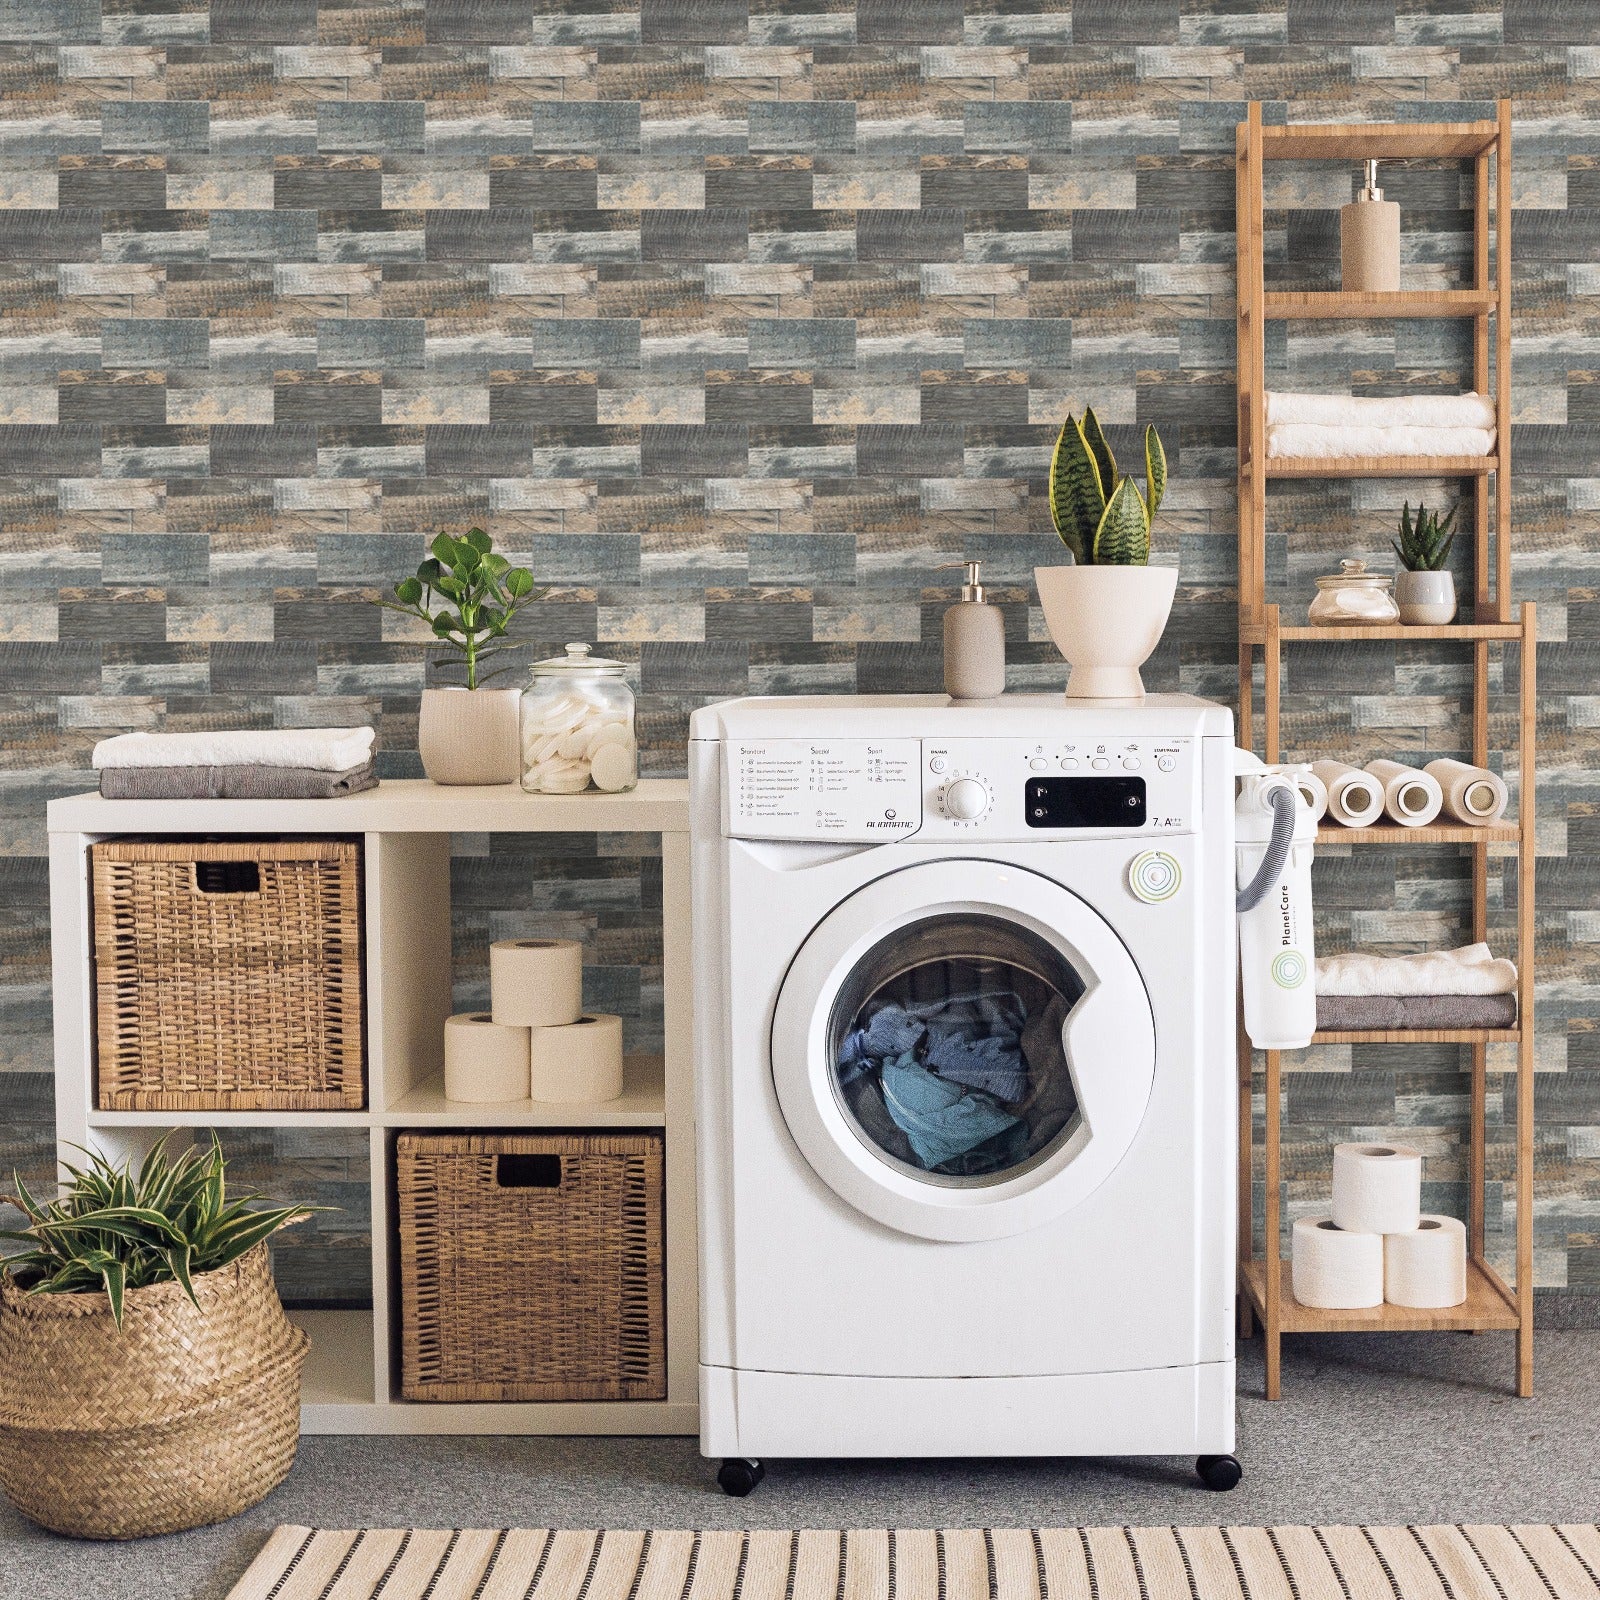 peel and stick wood tile for laundry room